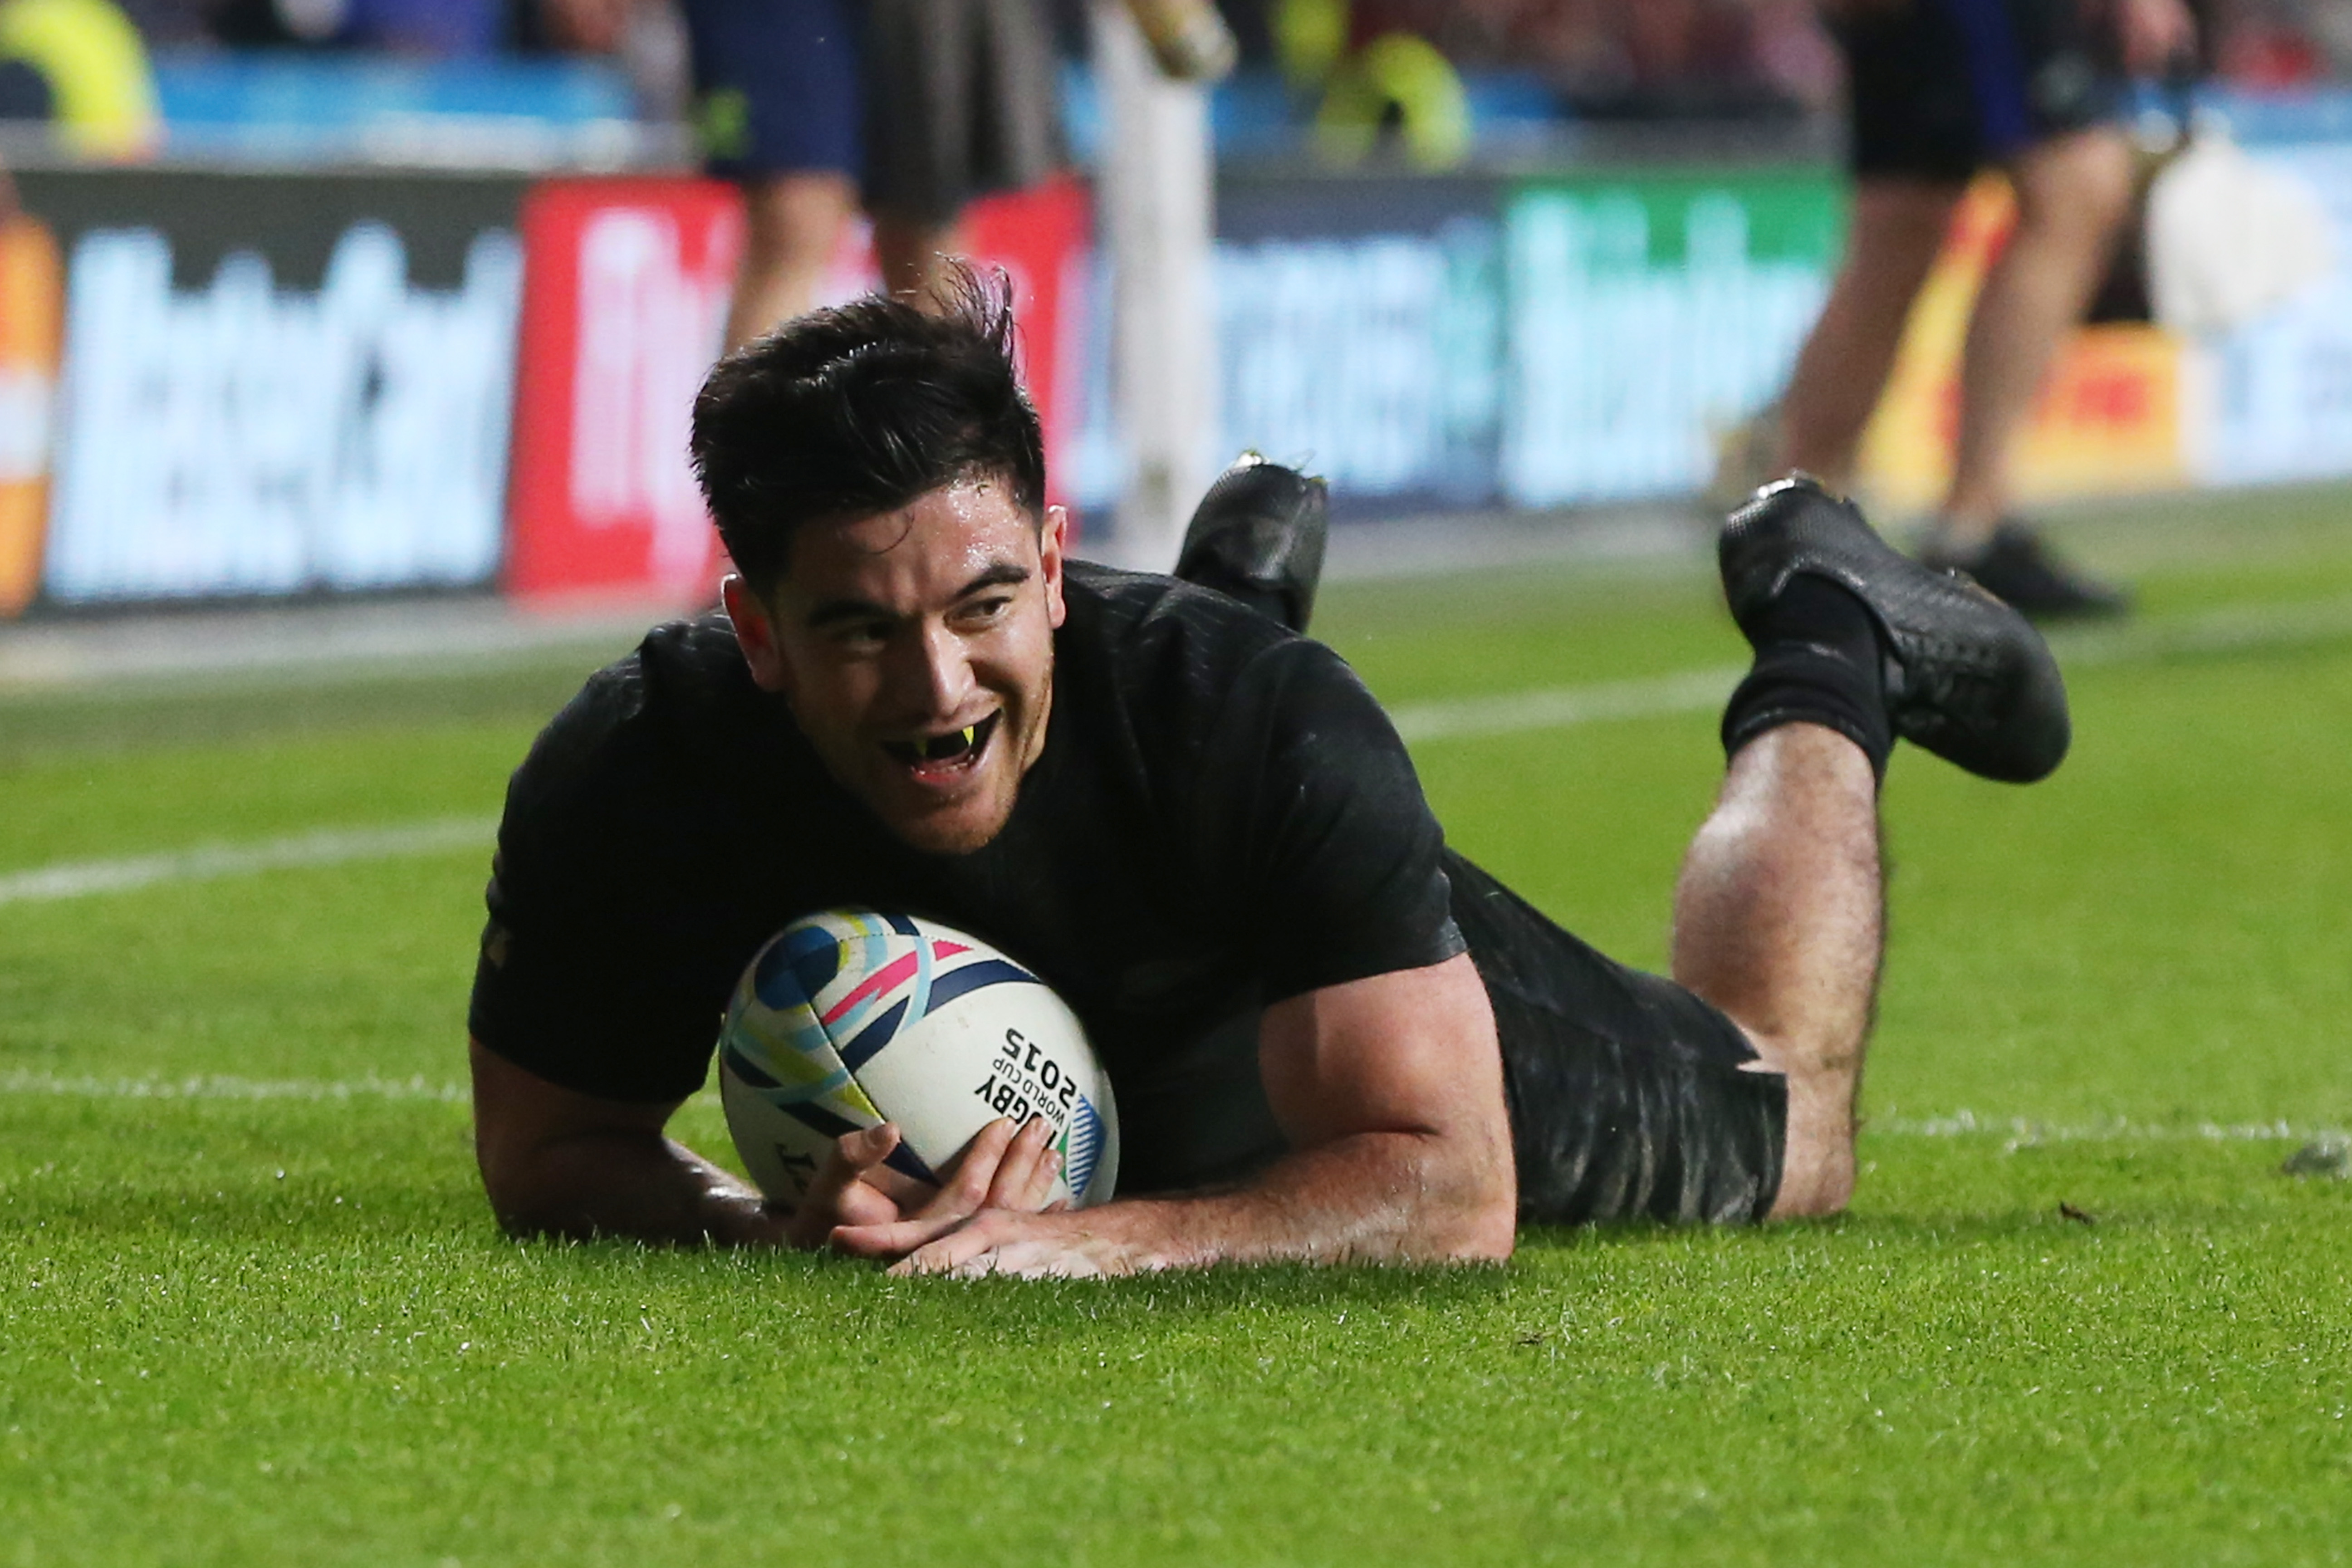 All Blacks World Cup Bolters throughout history